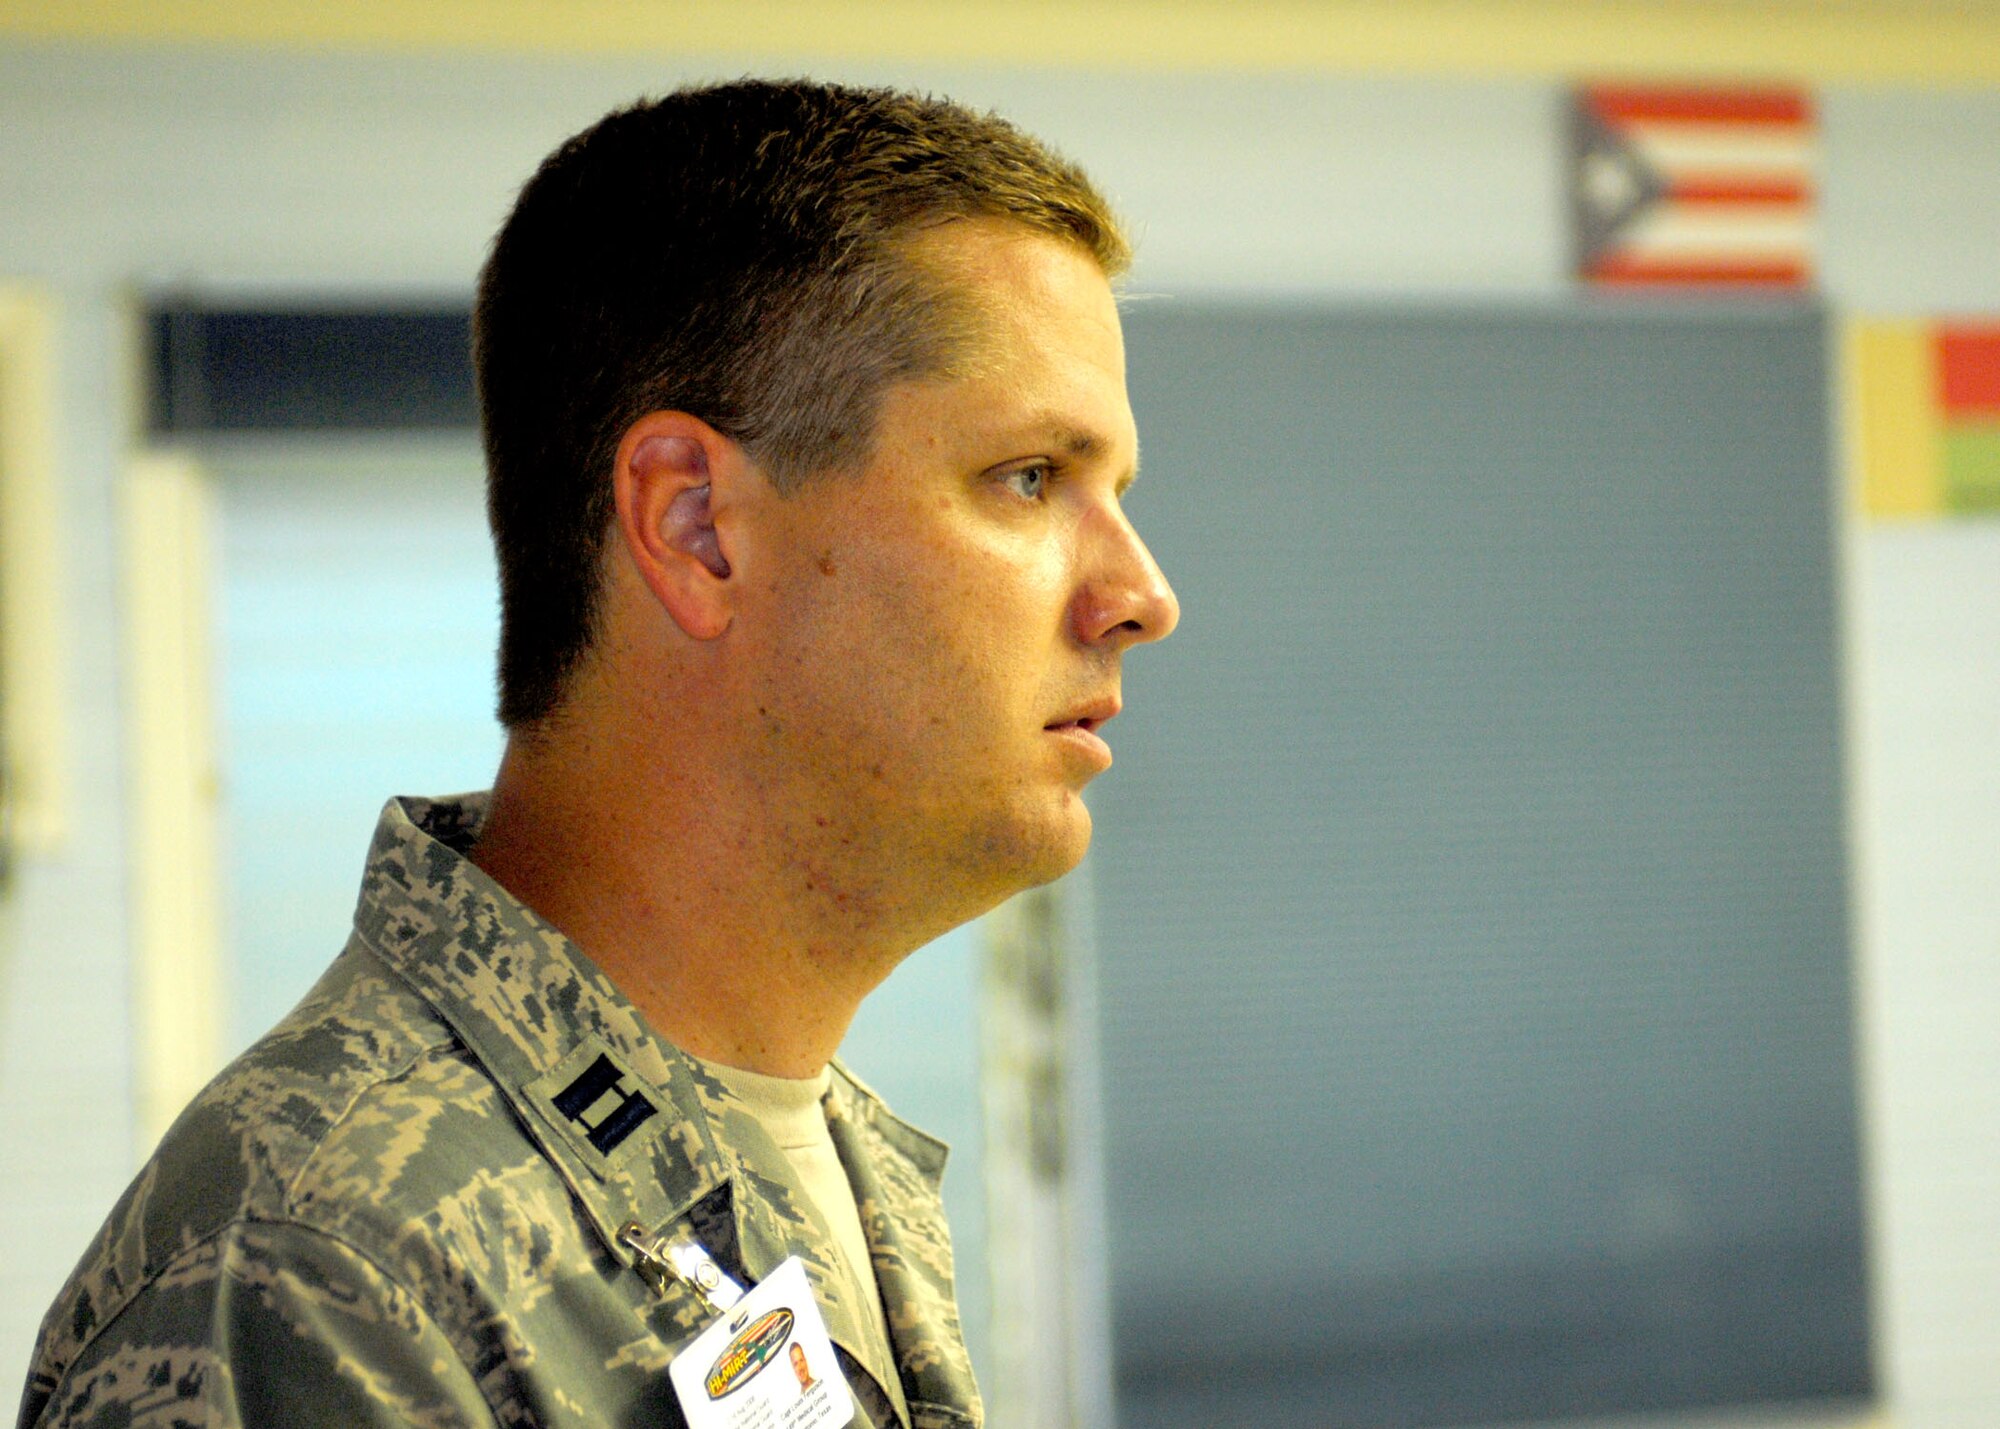 Chaplain Paul Ferguson Jr. of the Texas Air National Guard looks on at the Bobby Benson Center in Kahuku, Hawaii.  He addressed patients at the center on the importance of a drug free life.  Ferguson is part of a 51 person group of physicians, nurses and support personnel from the 149th Fighter Wing Medical Group at Lackland AFB, Texas working with the Hawaii ANG in support of the E Malama Kakou (to care for all) humanitarian program serving the medically underprivileged in Hawaii.
Photo by Master Sgt Robert Shelley
